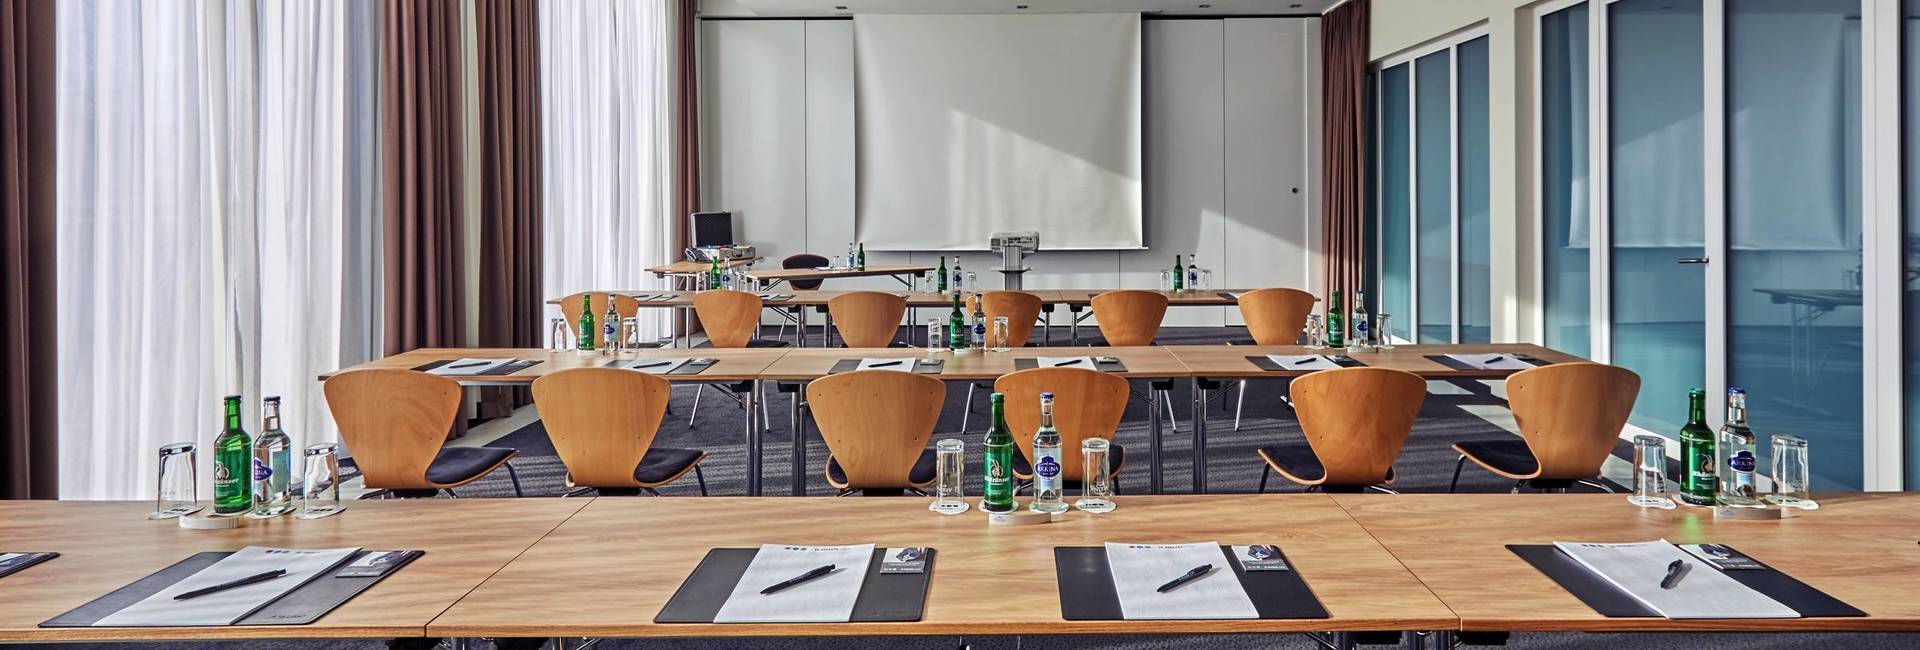 Meeting deals at the H4 Hotel Solothurn - Official website